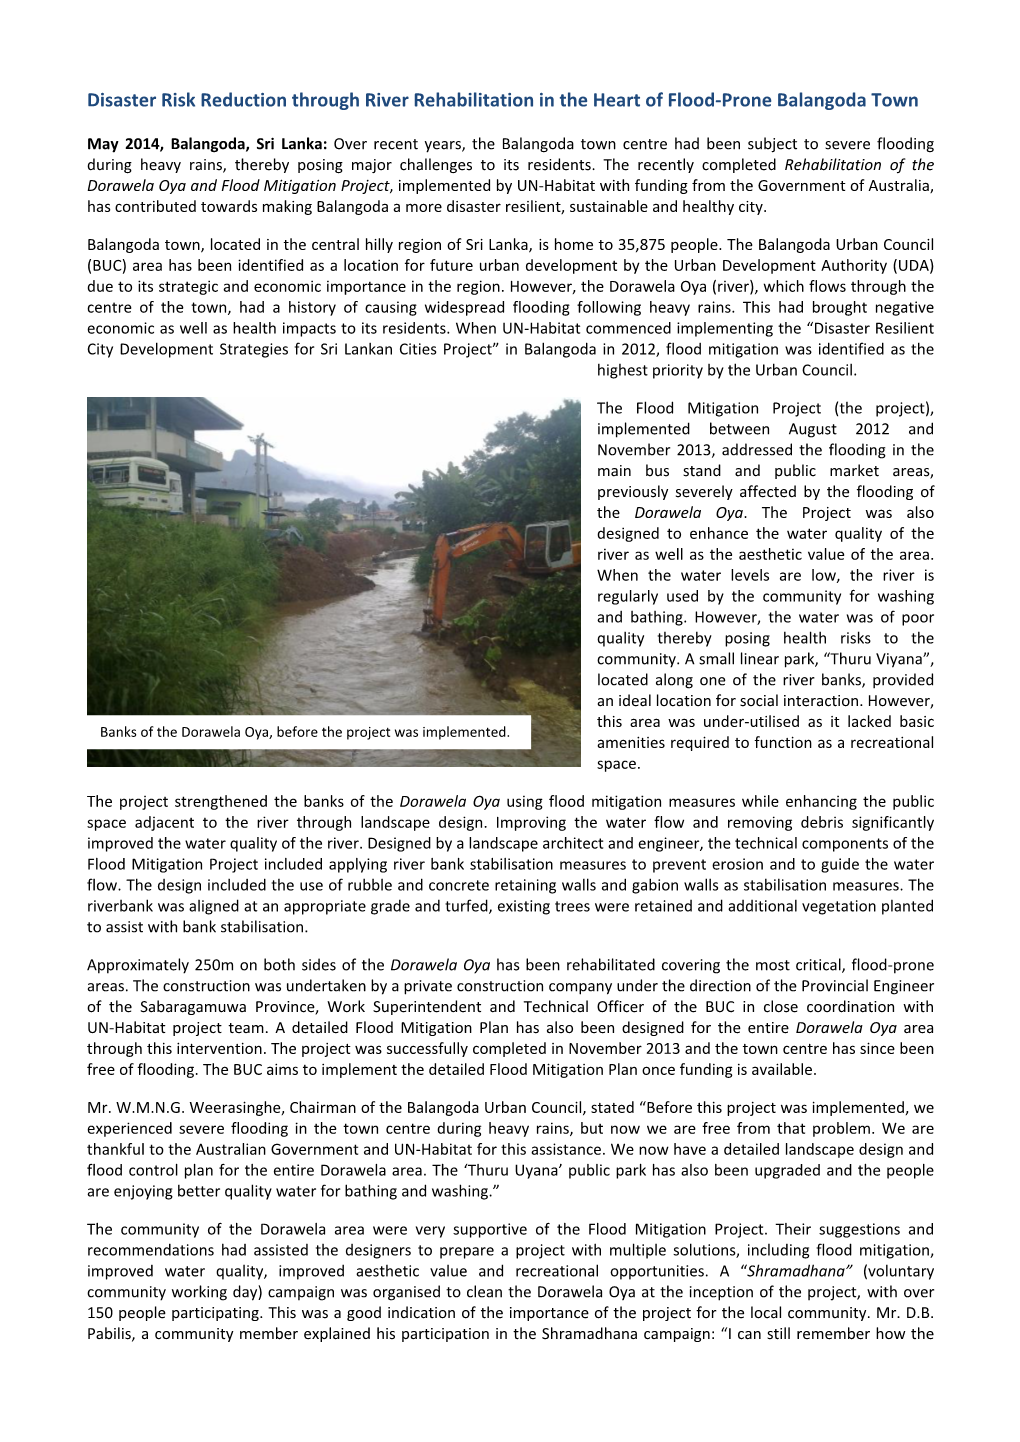 Disaster Risk Reduction Through River Rehabilitation in the Heart of Flood‐Prone Balangoda Town